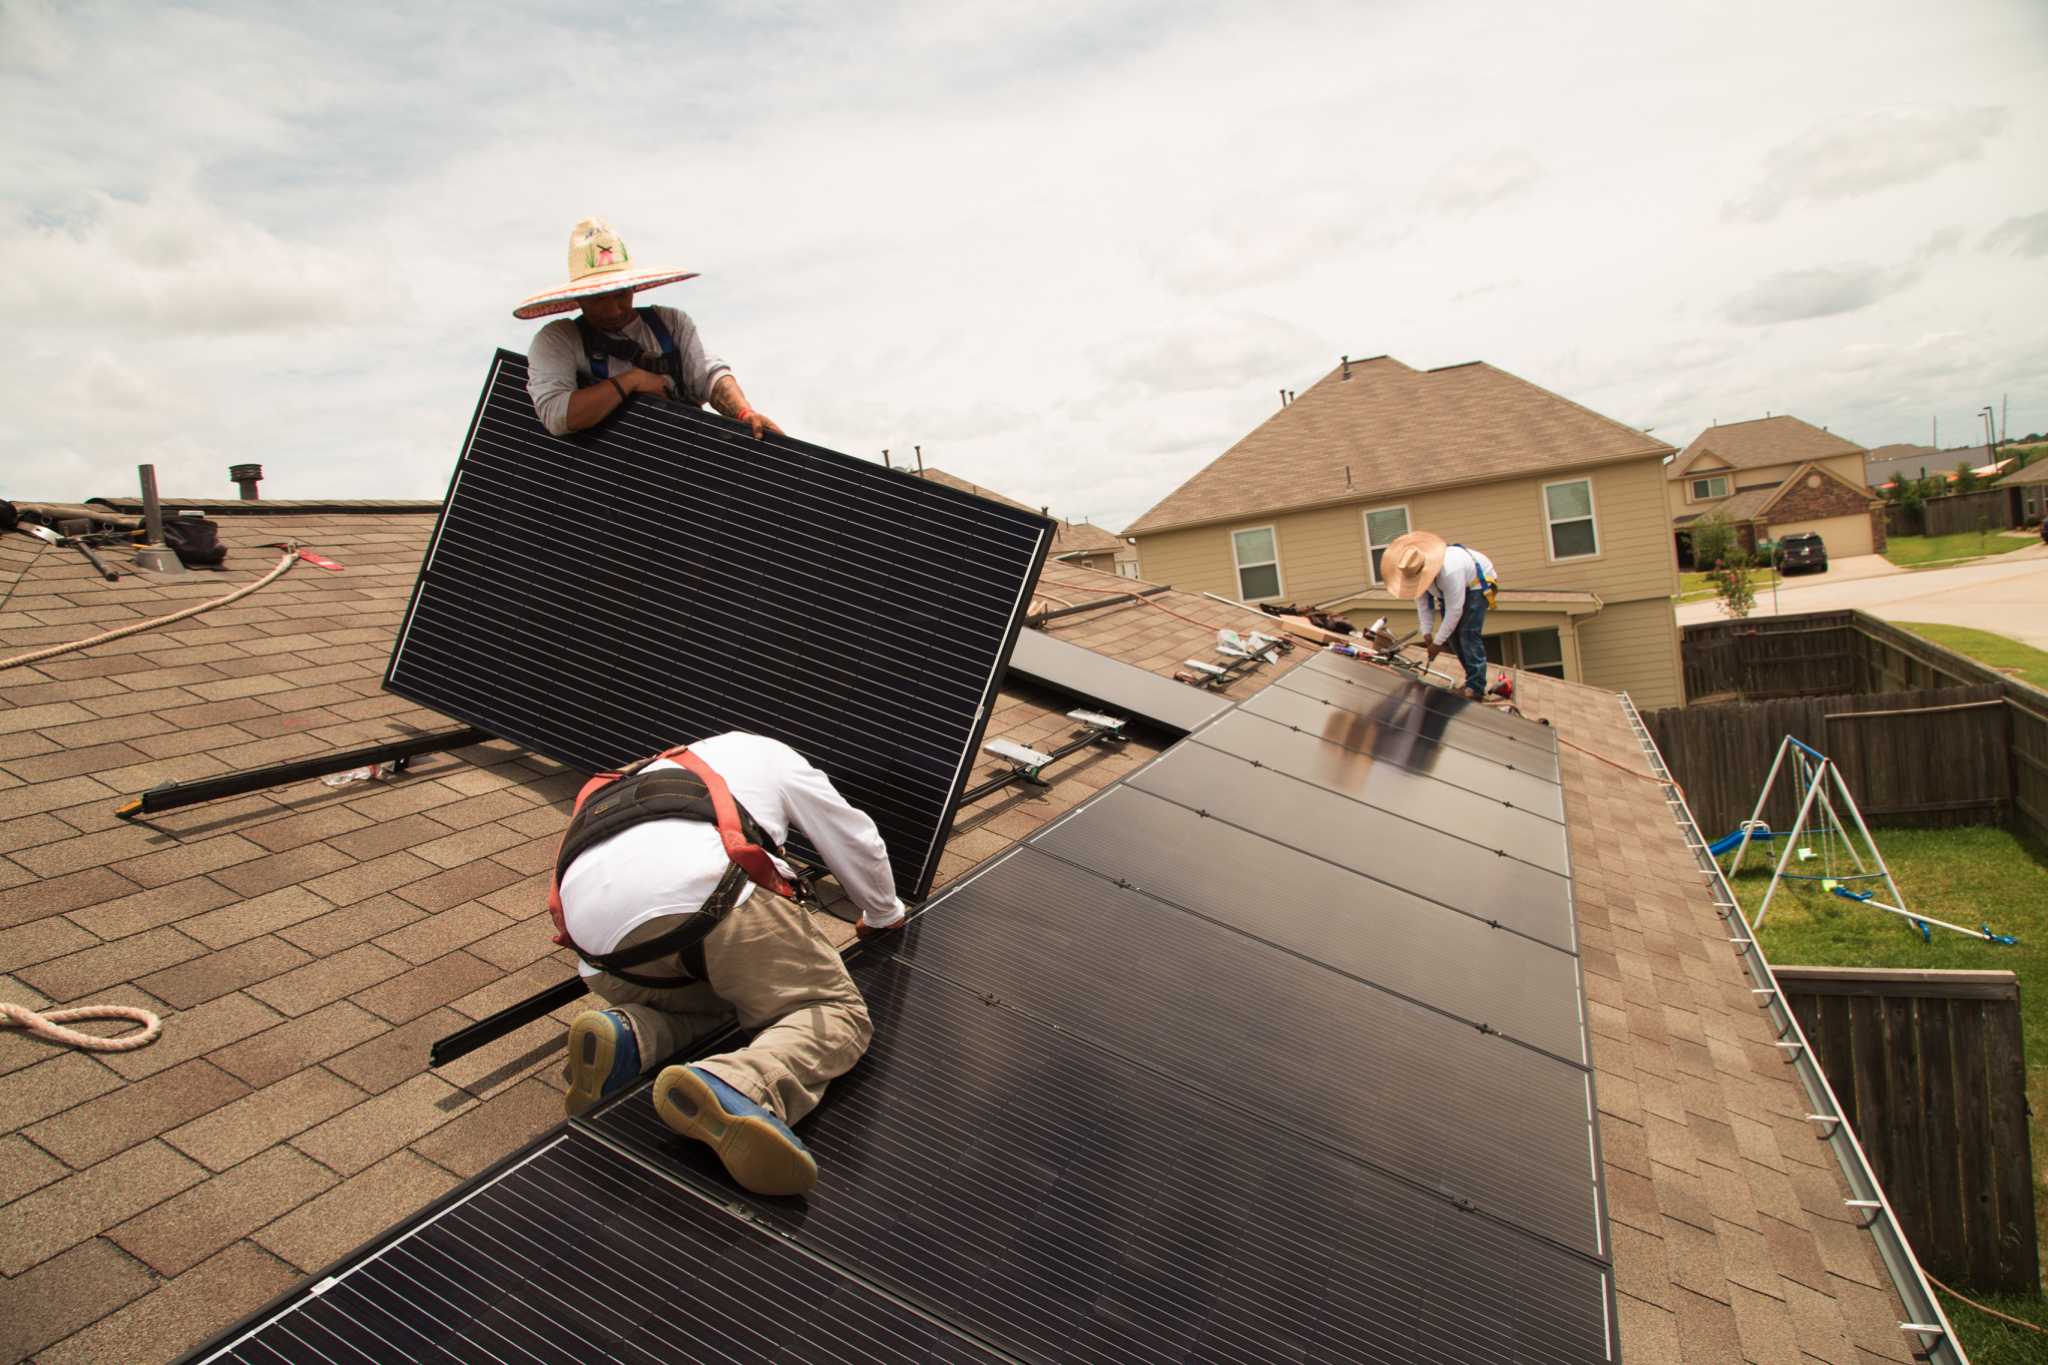 Biggest solar investments in Texas in places with regulated utilities - Houston Chronicle2048 x 1365